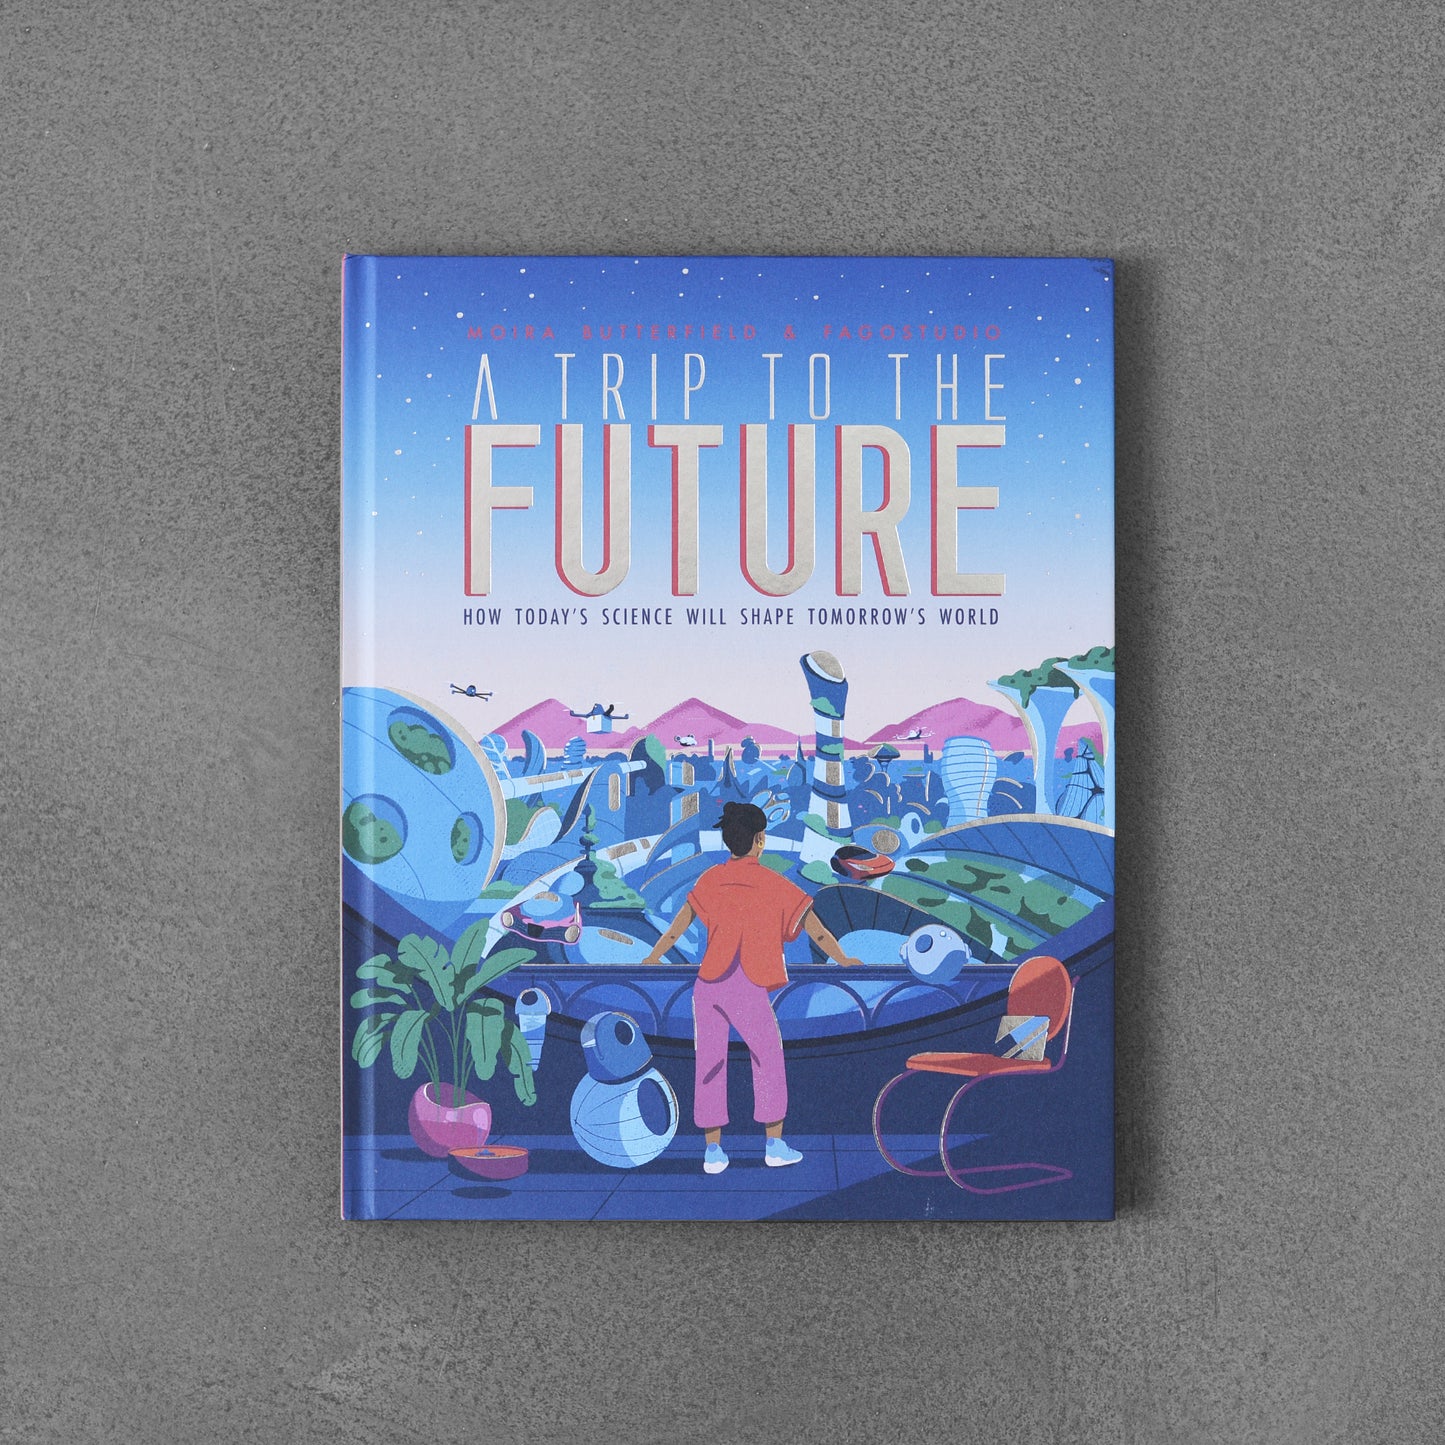 A Trip to the Future: How Today’s Science Will Shape Tomorrow’s World